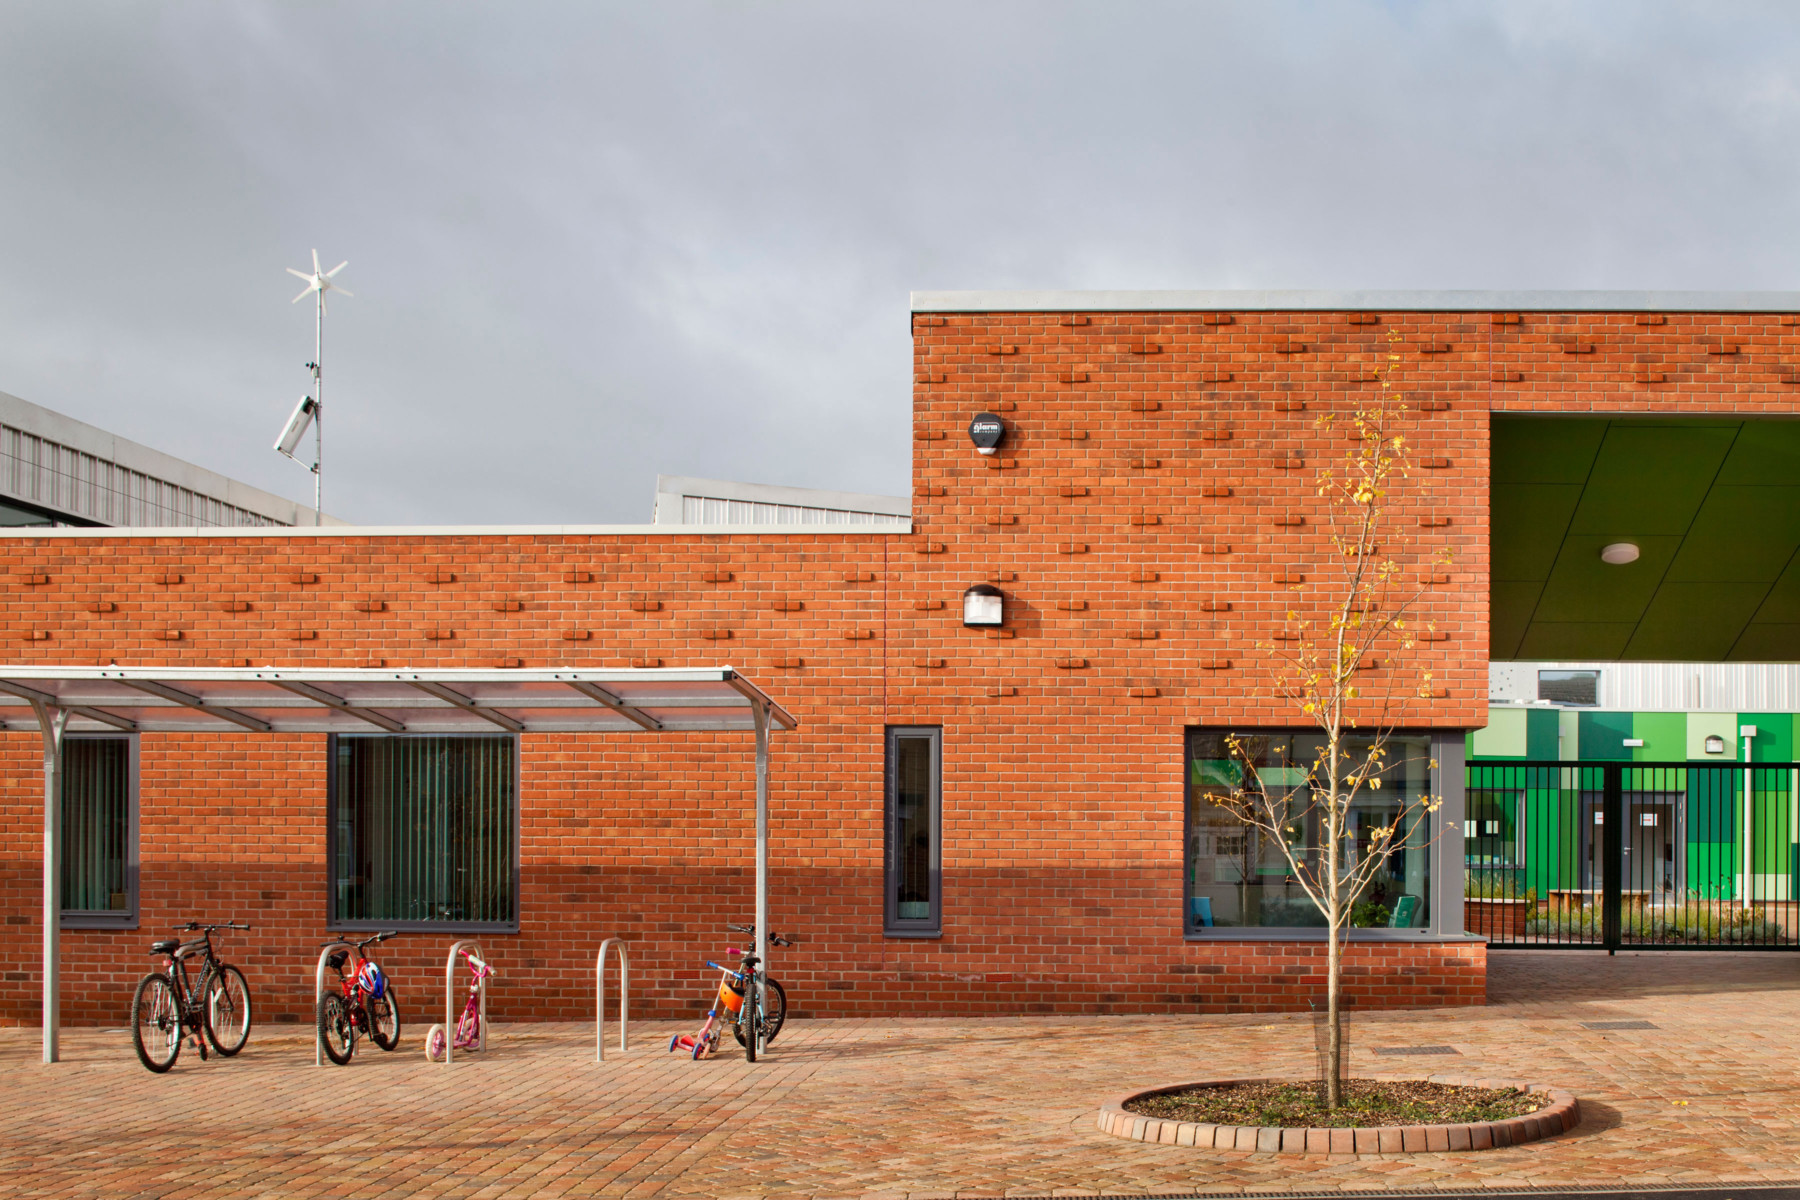 Sarah-Wigglesworth-Architects Takeley-Primary-School Entrance-Crop 3600